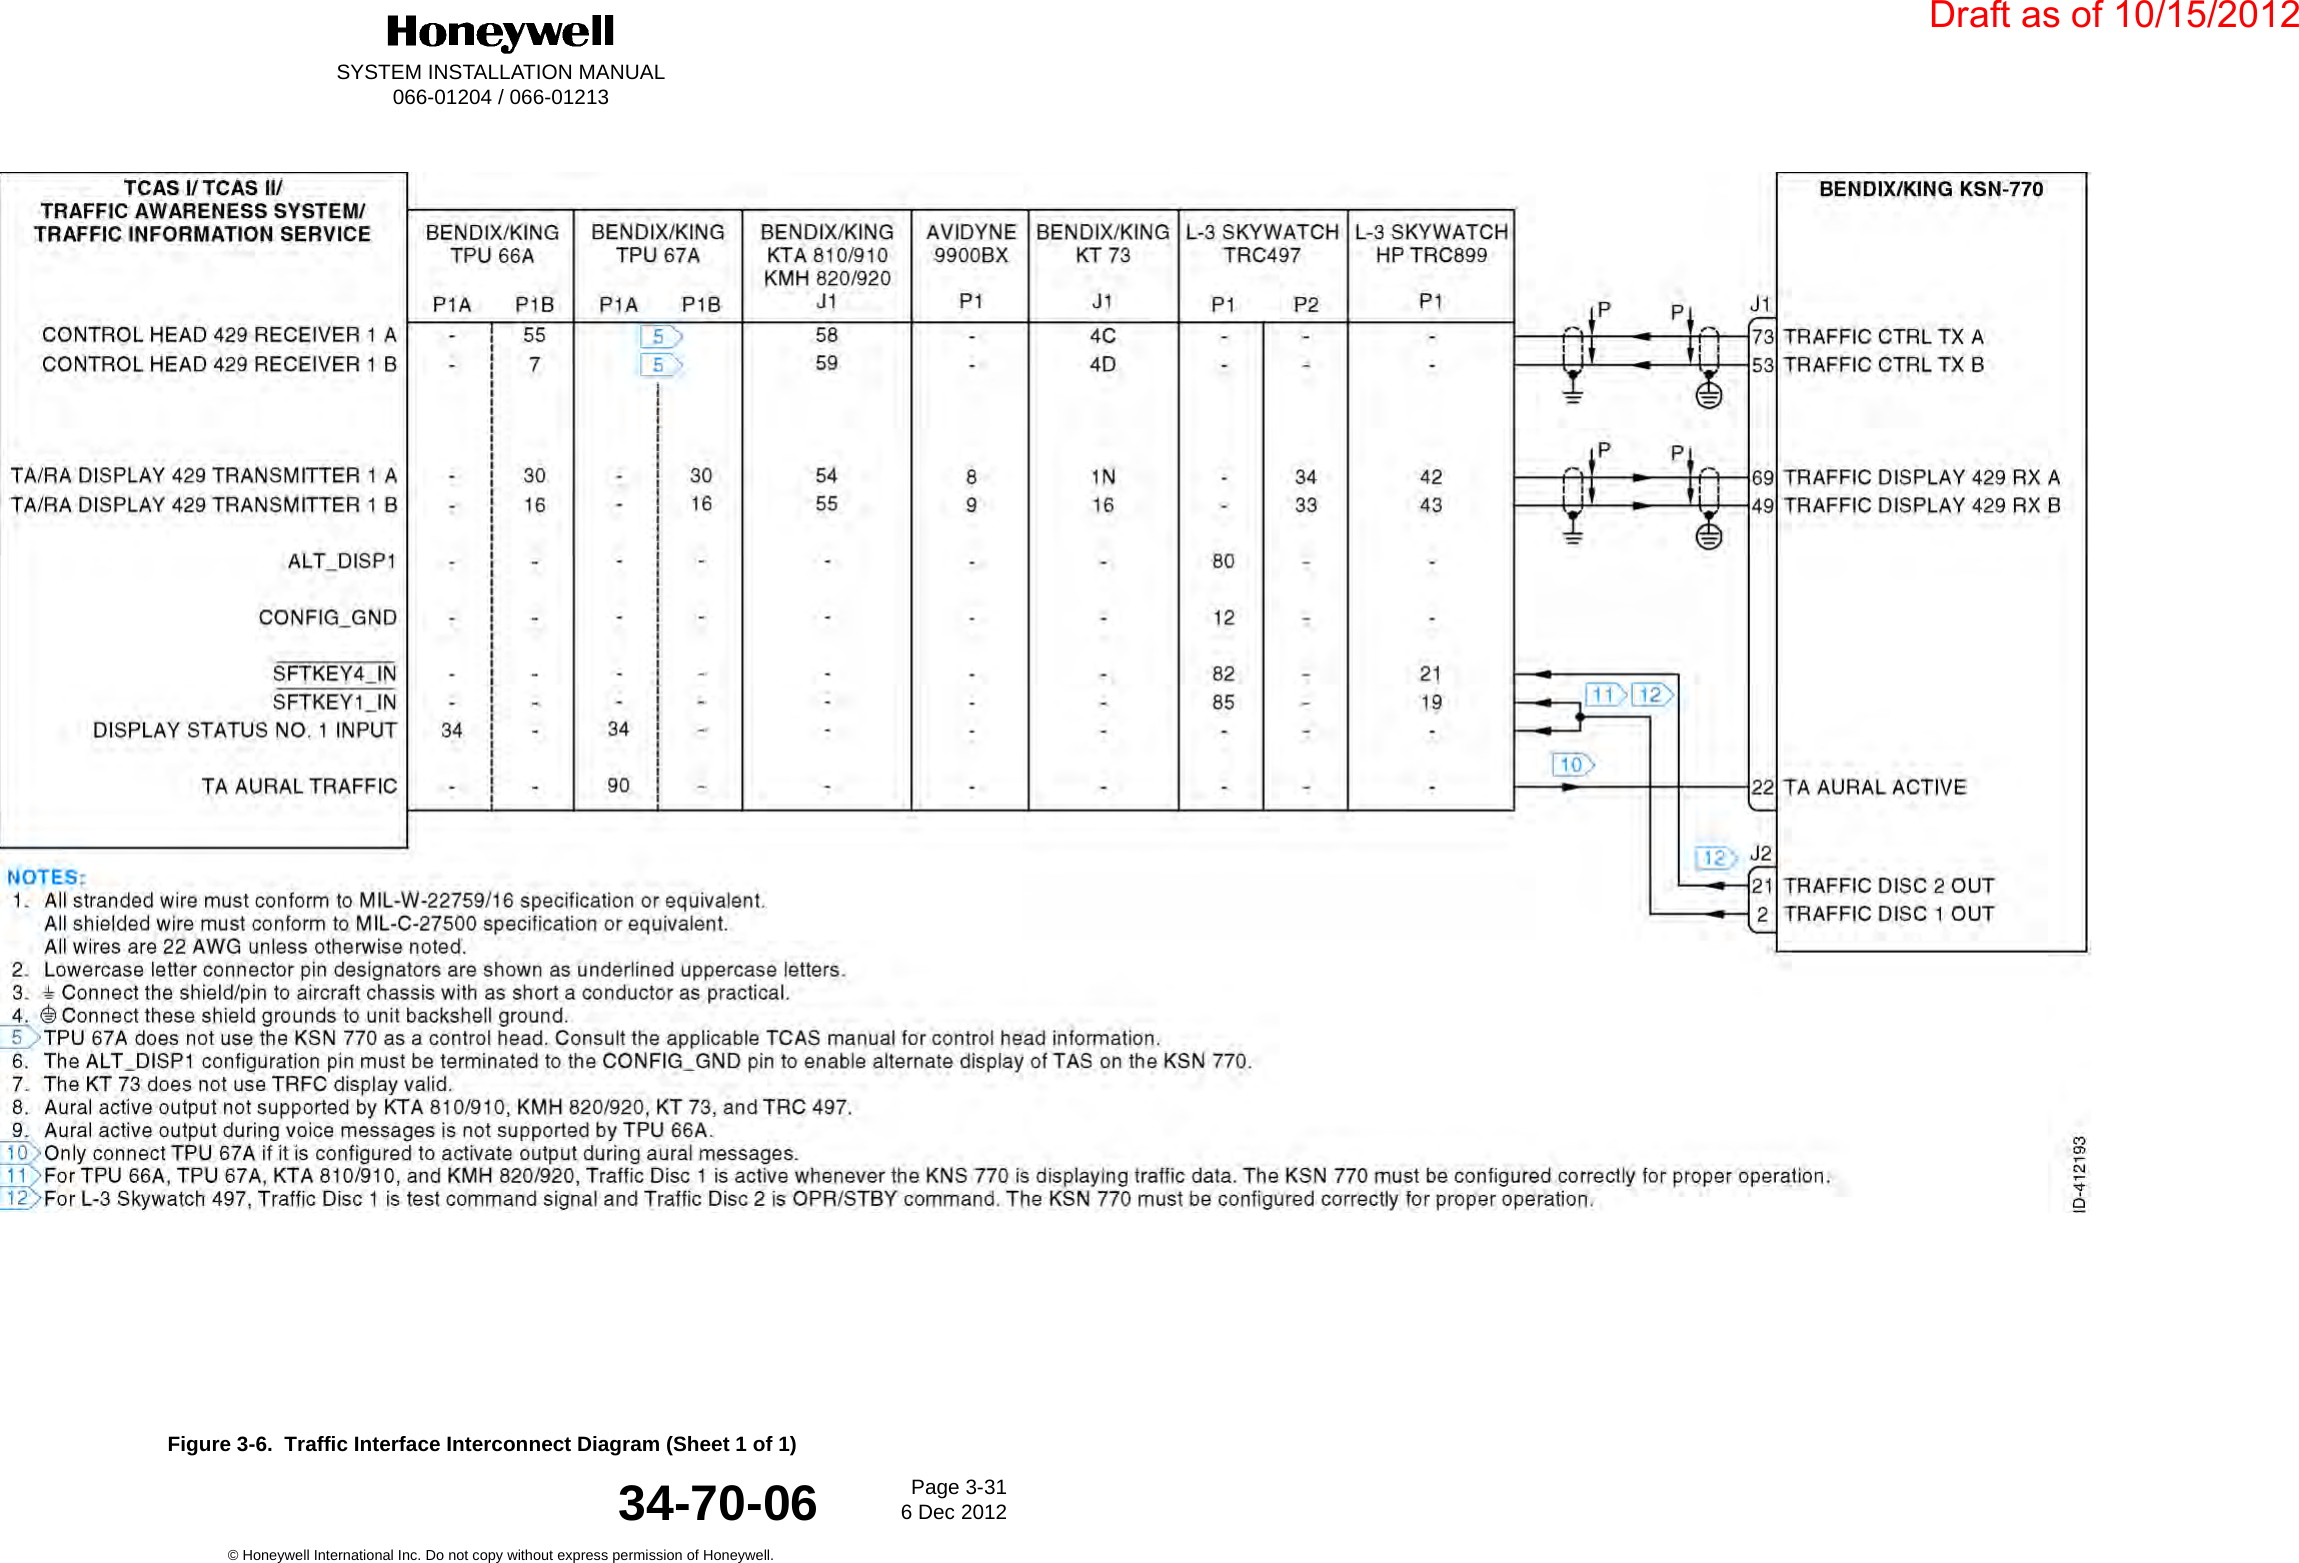 DraftSYSTEM INSTALLATION MANUAL066-01204 / 066-01213Page 3-316 Dec 2012© Honeywell International Inc. Do not copy without express permission of Honeywell.34-70-06Figure 3-6.  Traffic Interface Interconnect Diagram (Sheet 1 of 1)Draft as of 10/15/2012